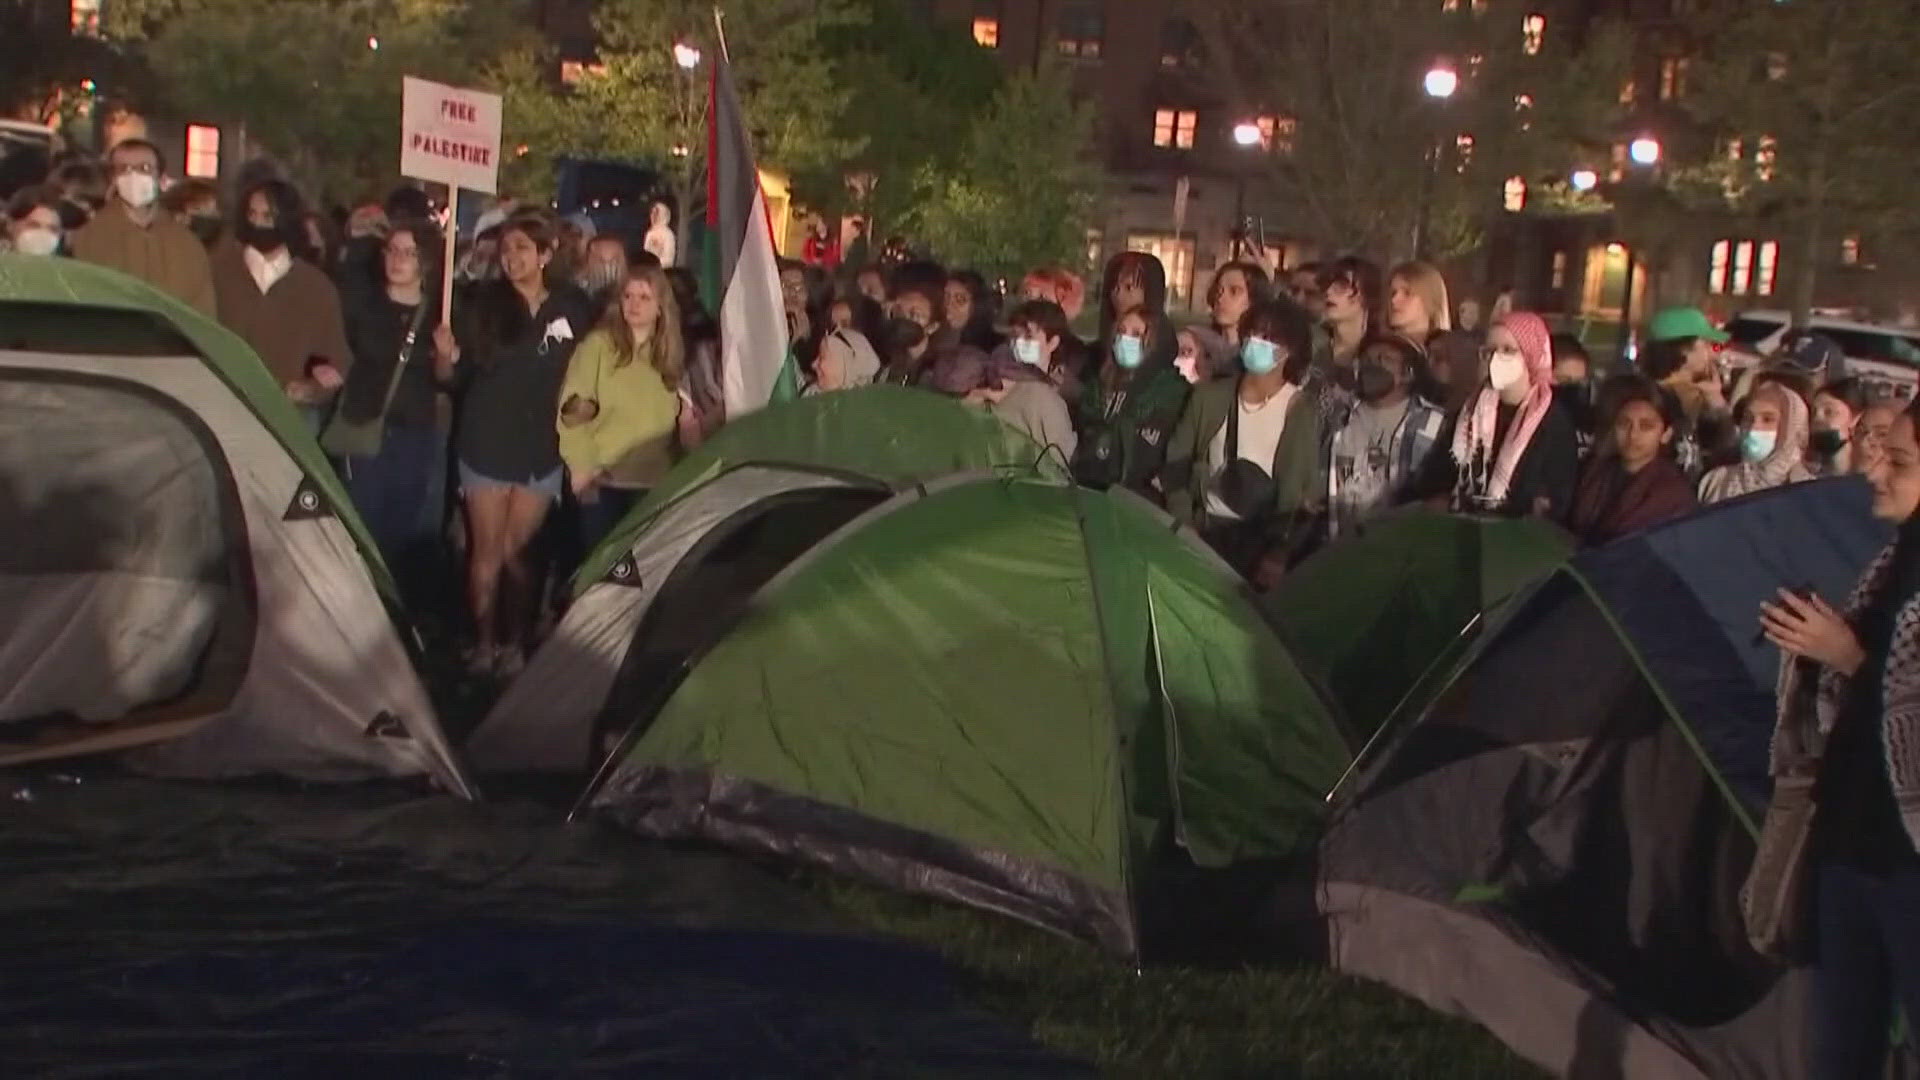 Wednesday's protest is expected to begin in the evening hours at the South Oval, where dozens were arrested last week after setting up an encampment.